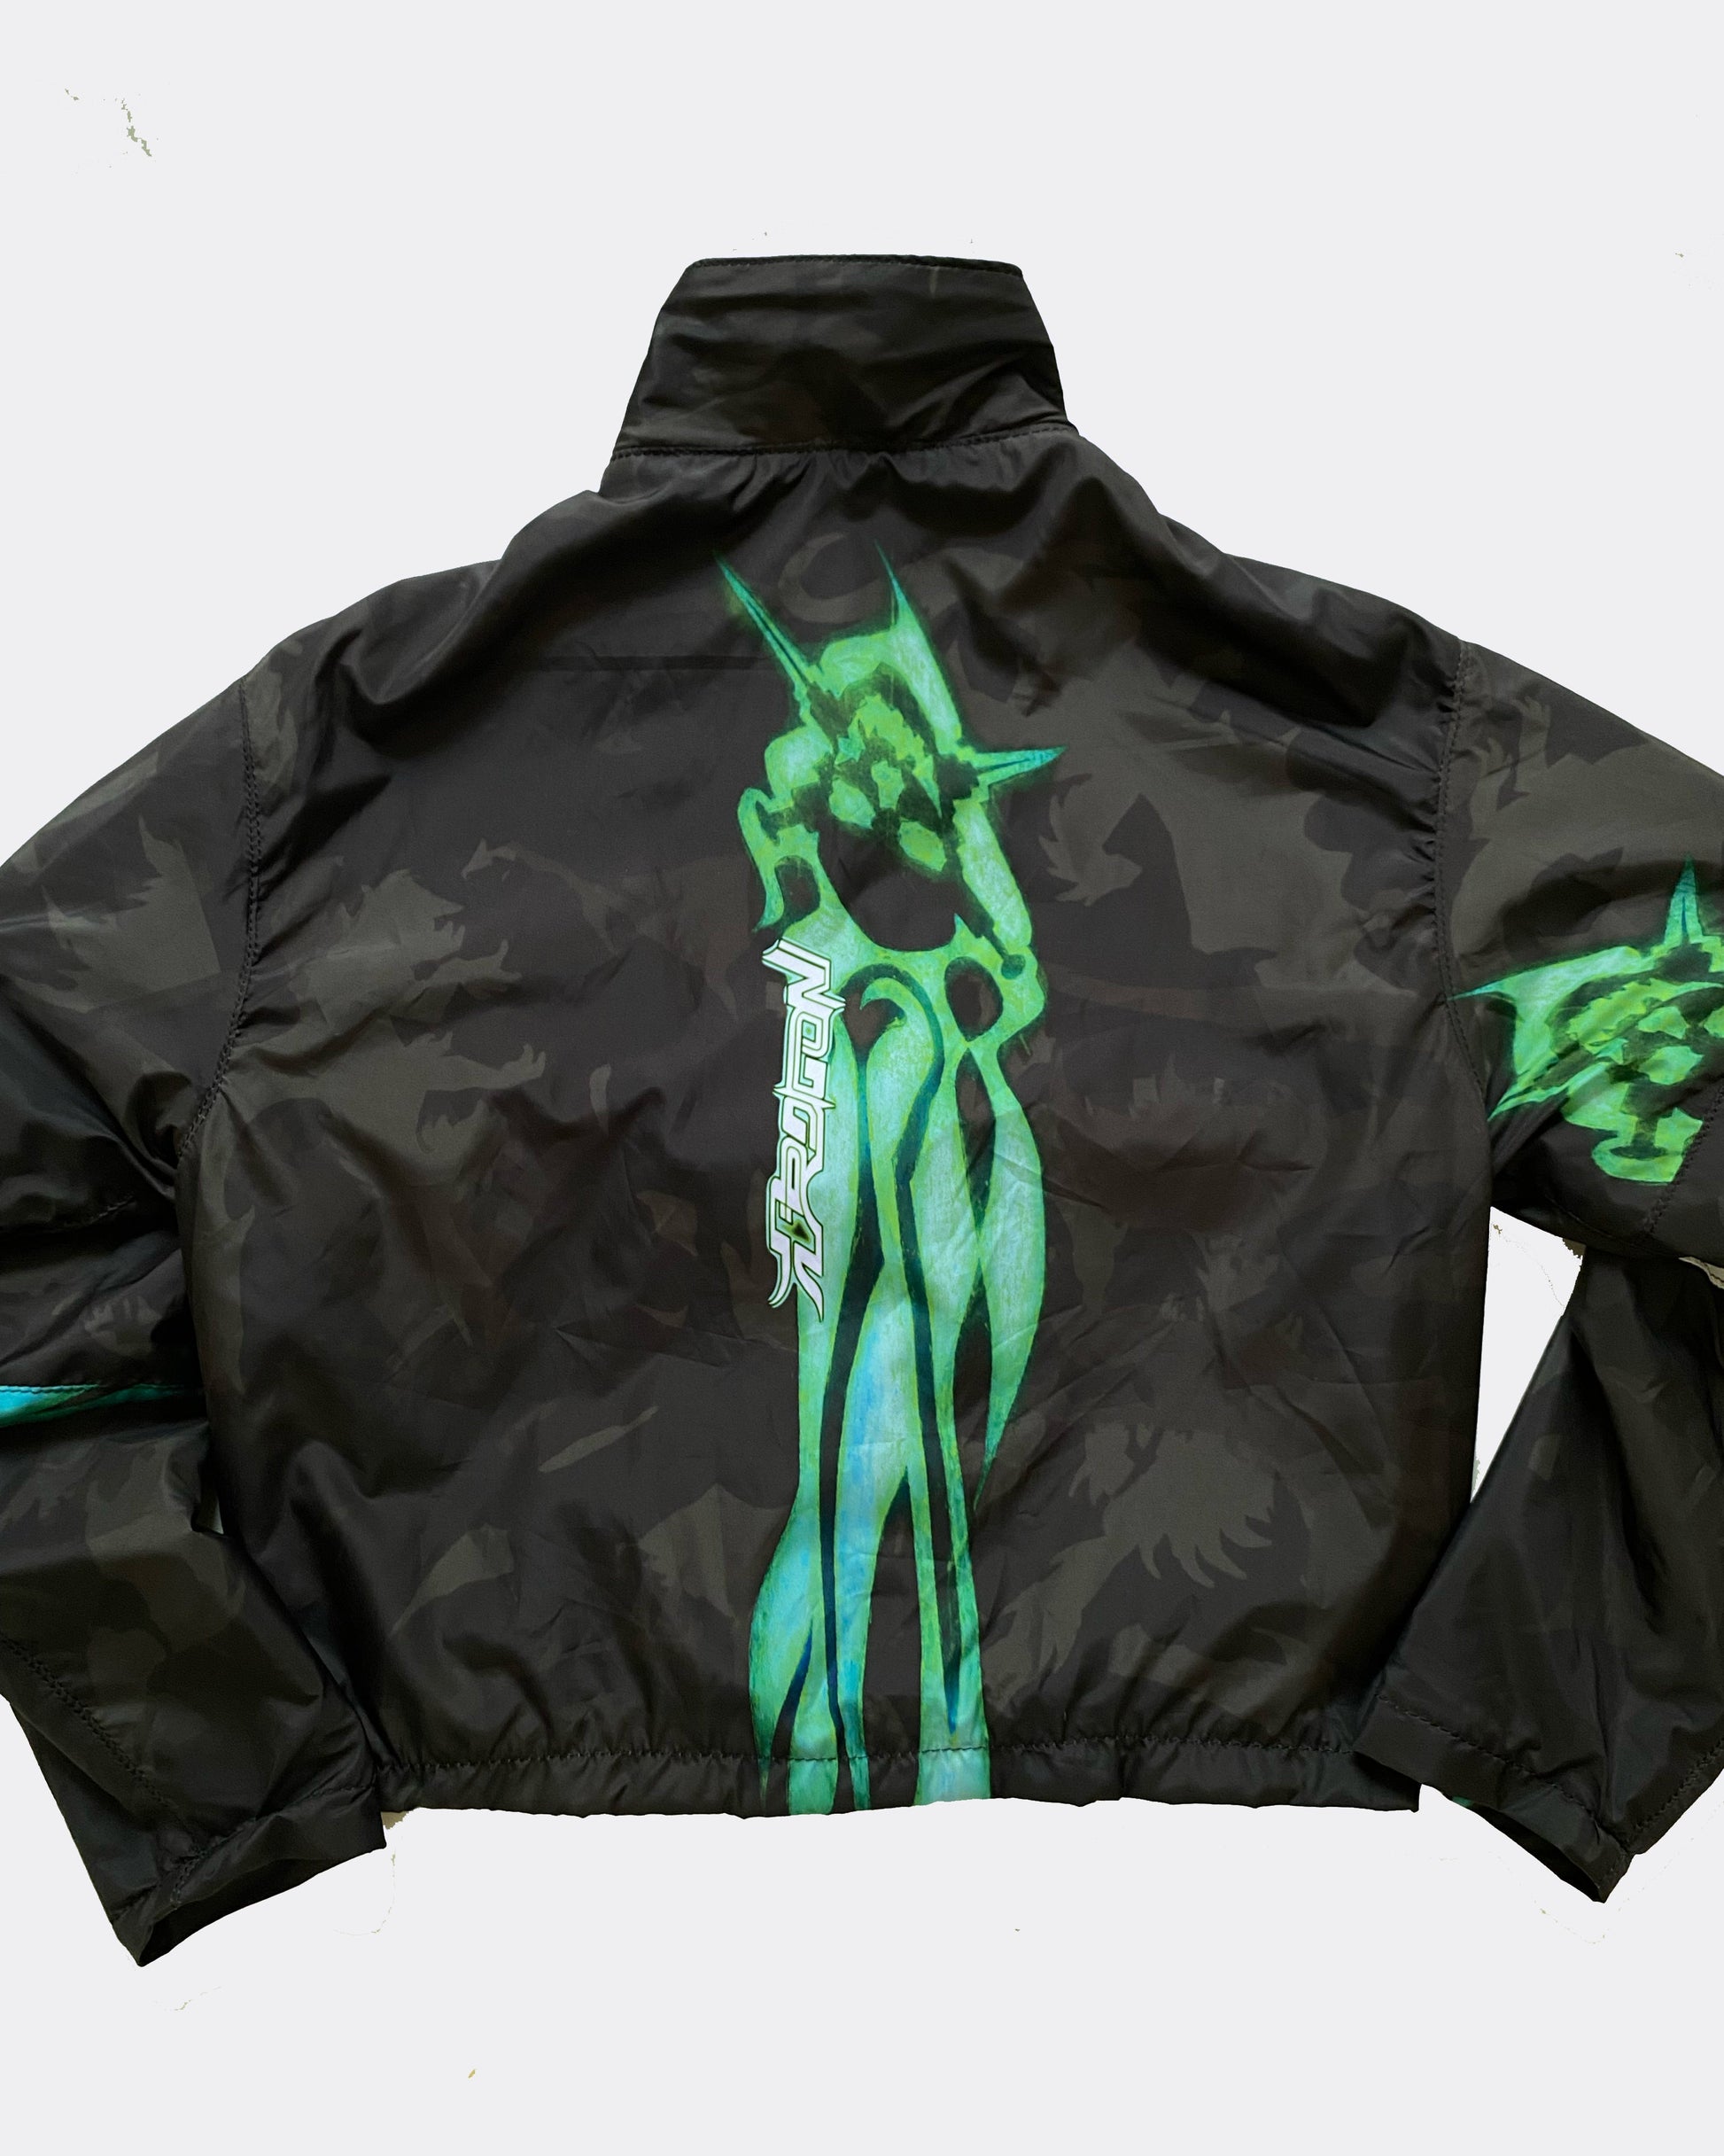 DRAGON JACKET - FRSR - PREAPOCLO